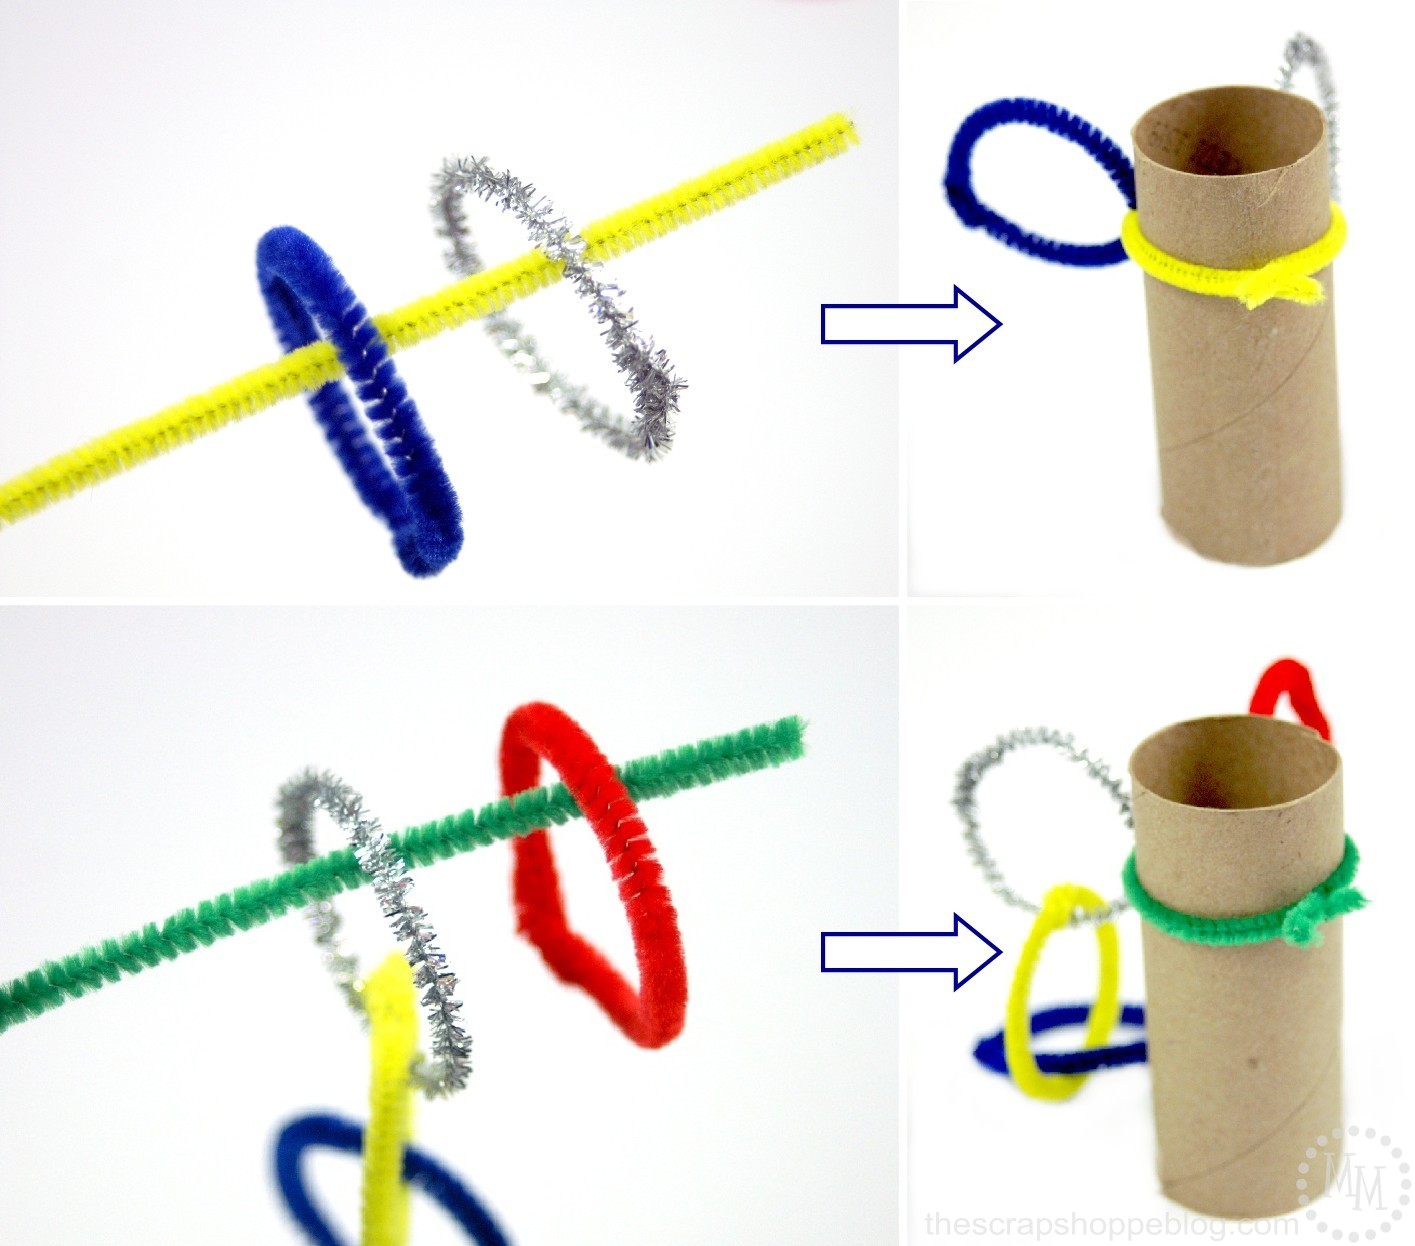 connect chenille stem rings to create Olympic rings